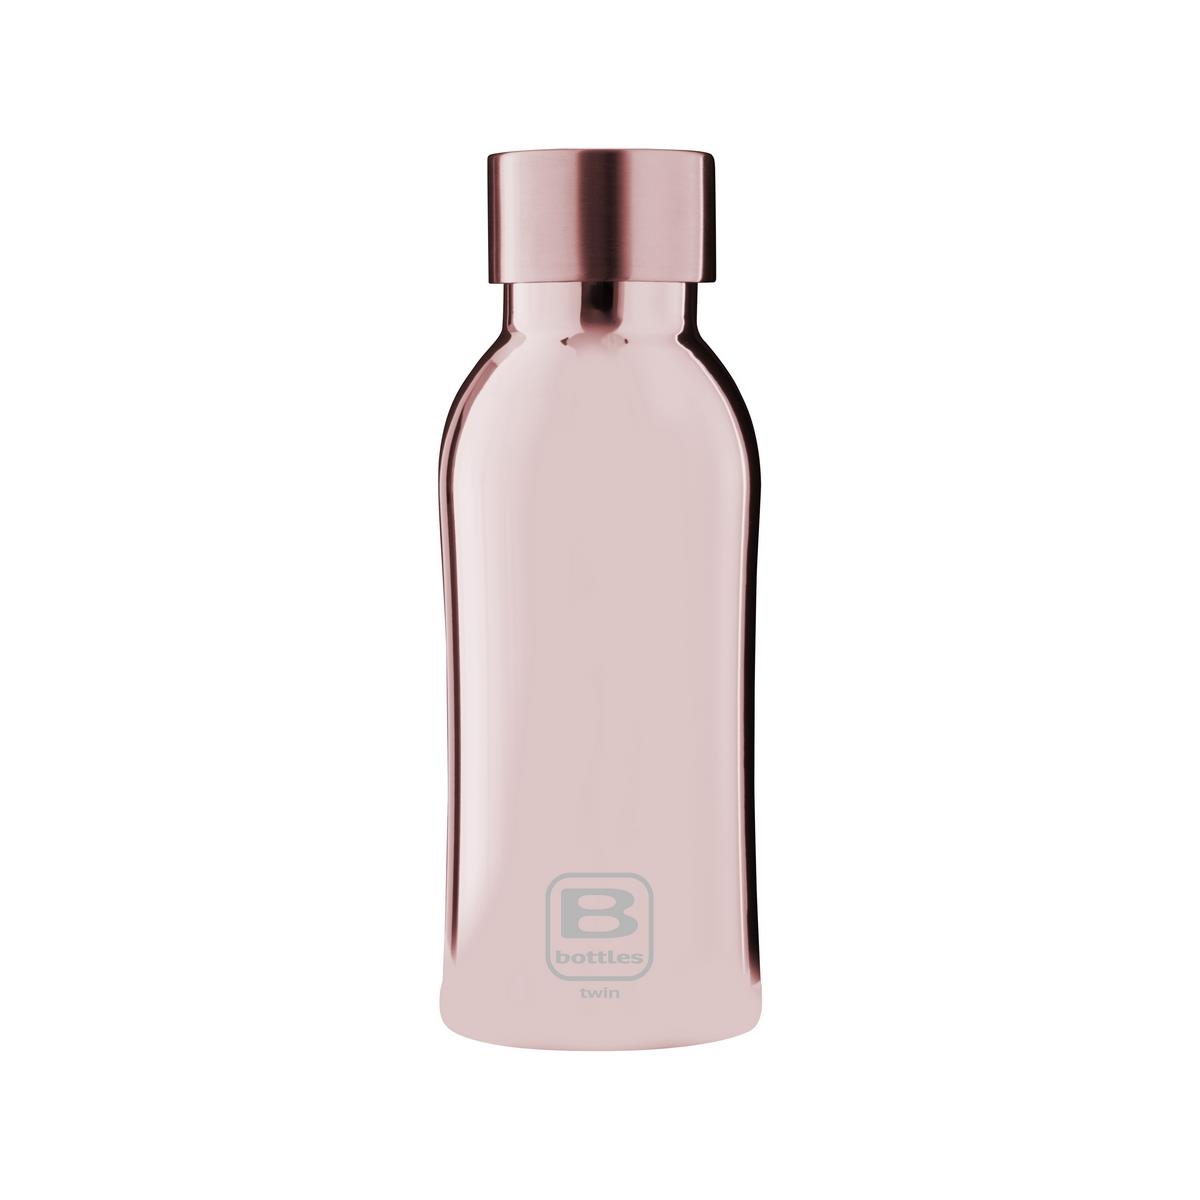 photo B Bottles Twin - Rose Gold Lux ??- 350 ml - Double wall thermal bottle in 18/10 stainless steel